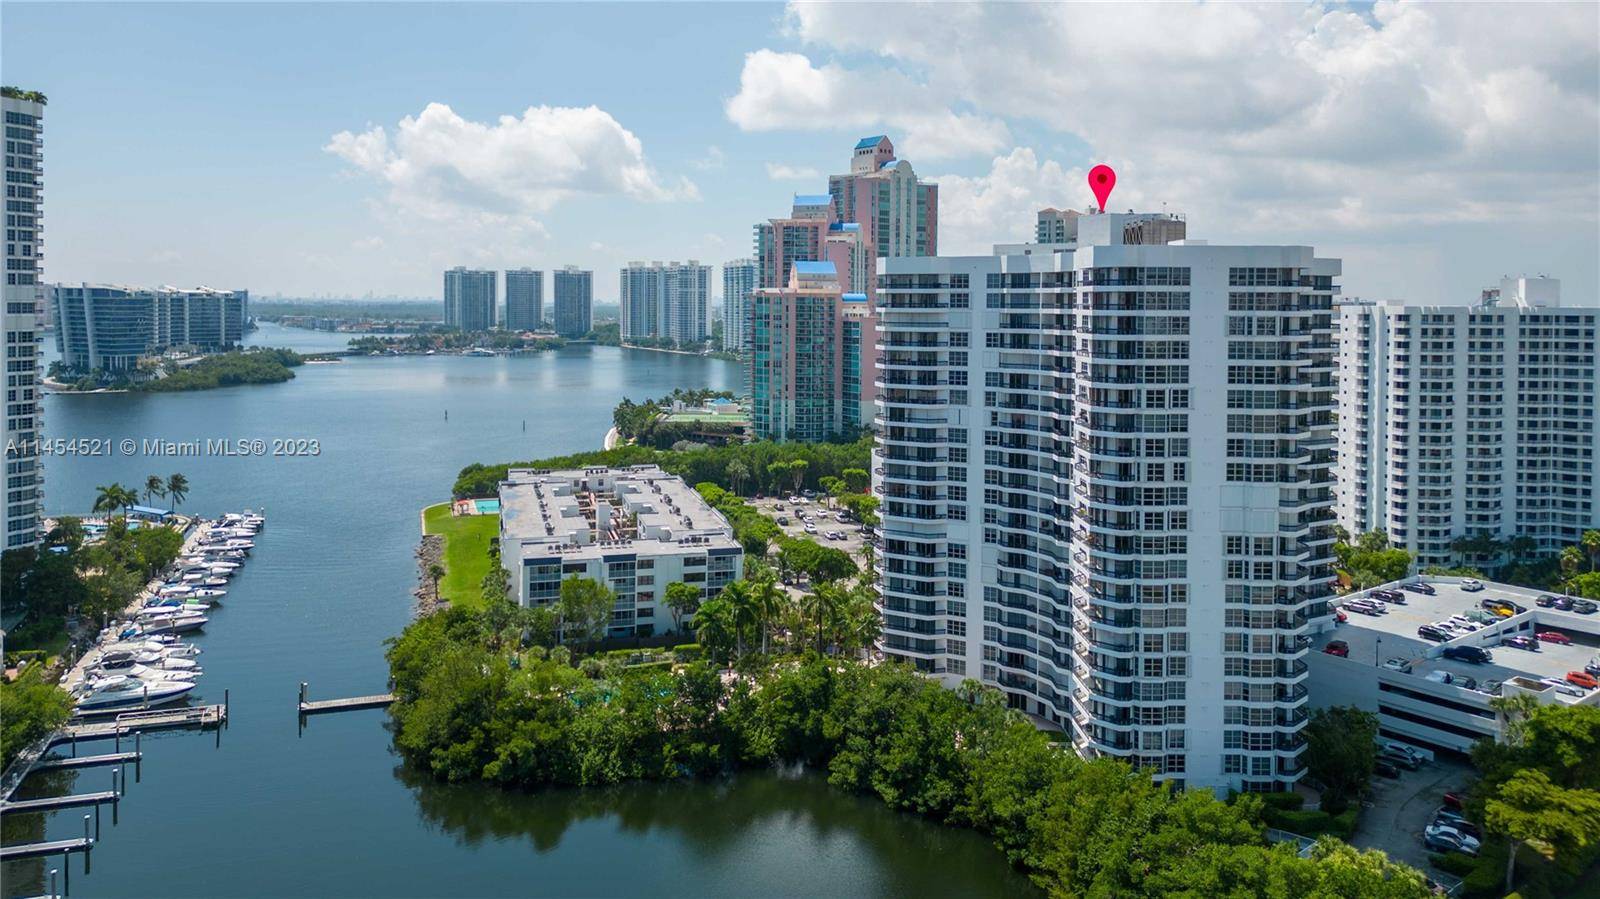 Immaculate 2 bed, 2 bath unit in Mystic Point Tower 600, featuring elegant porcelain floors, a stunning golf course view, and offered fully furnished in excellent condition.